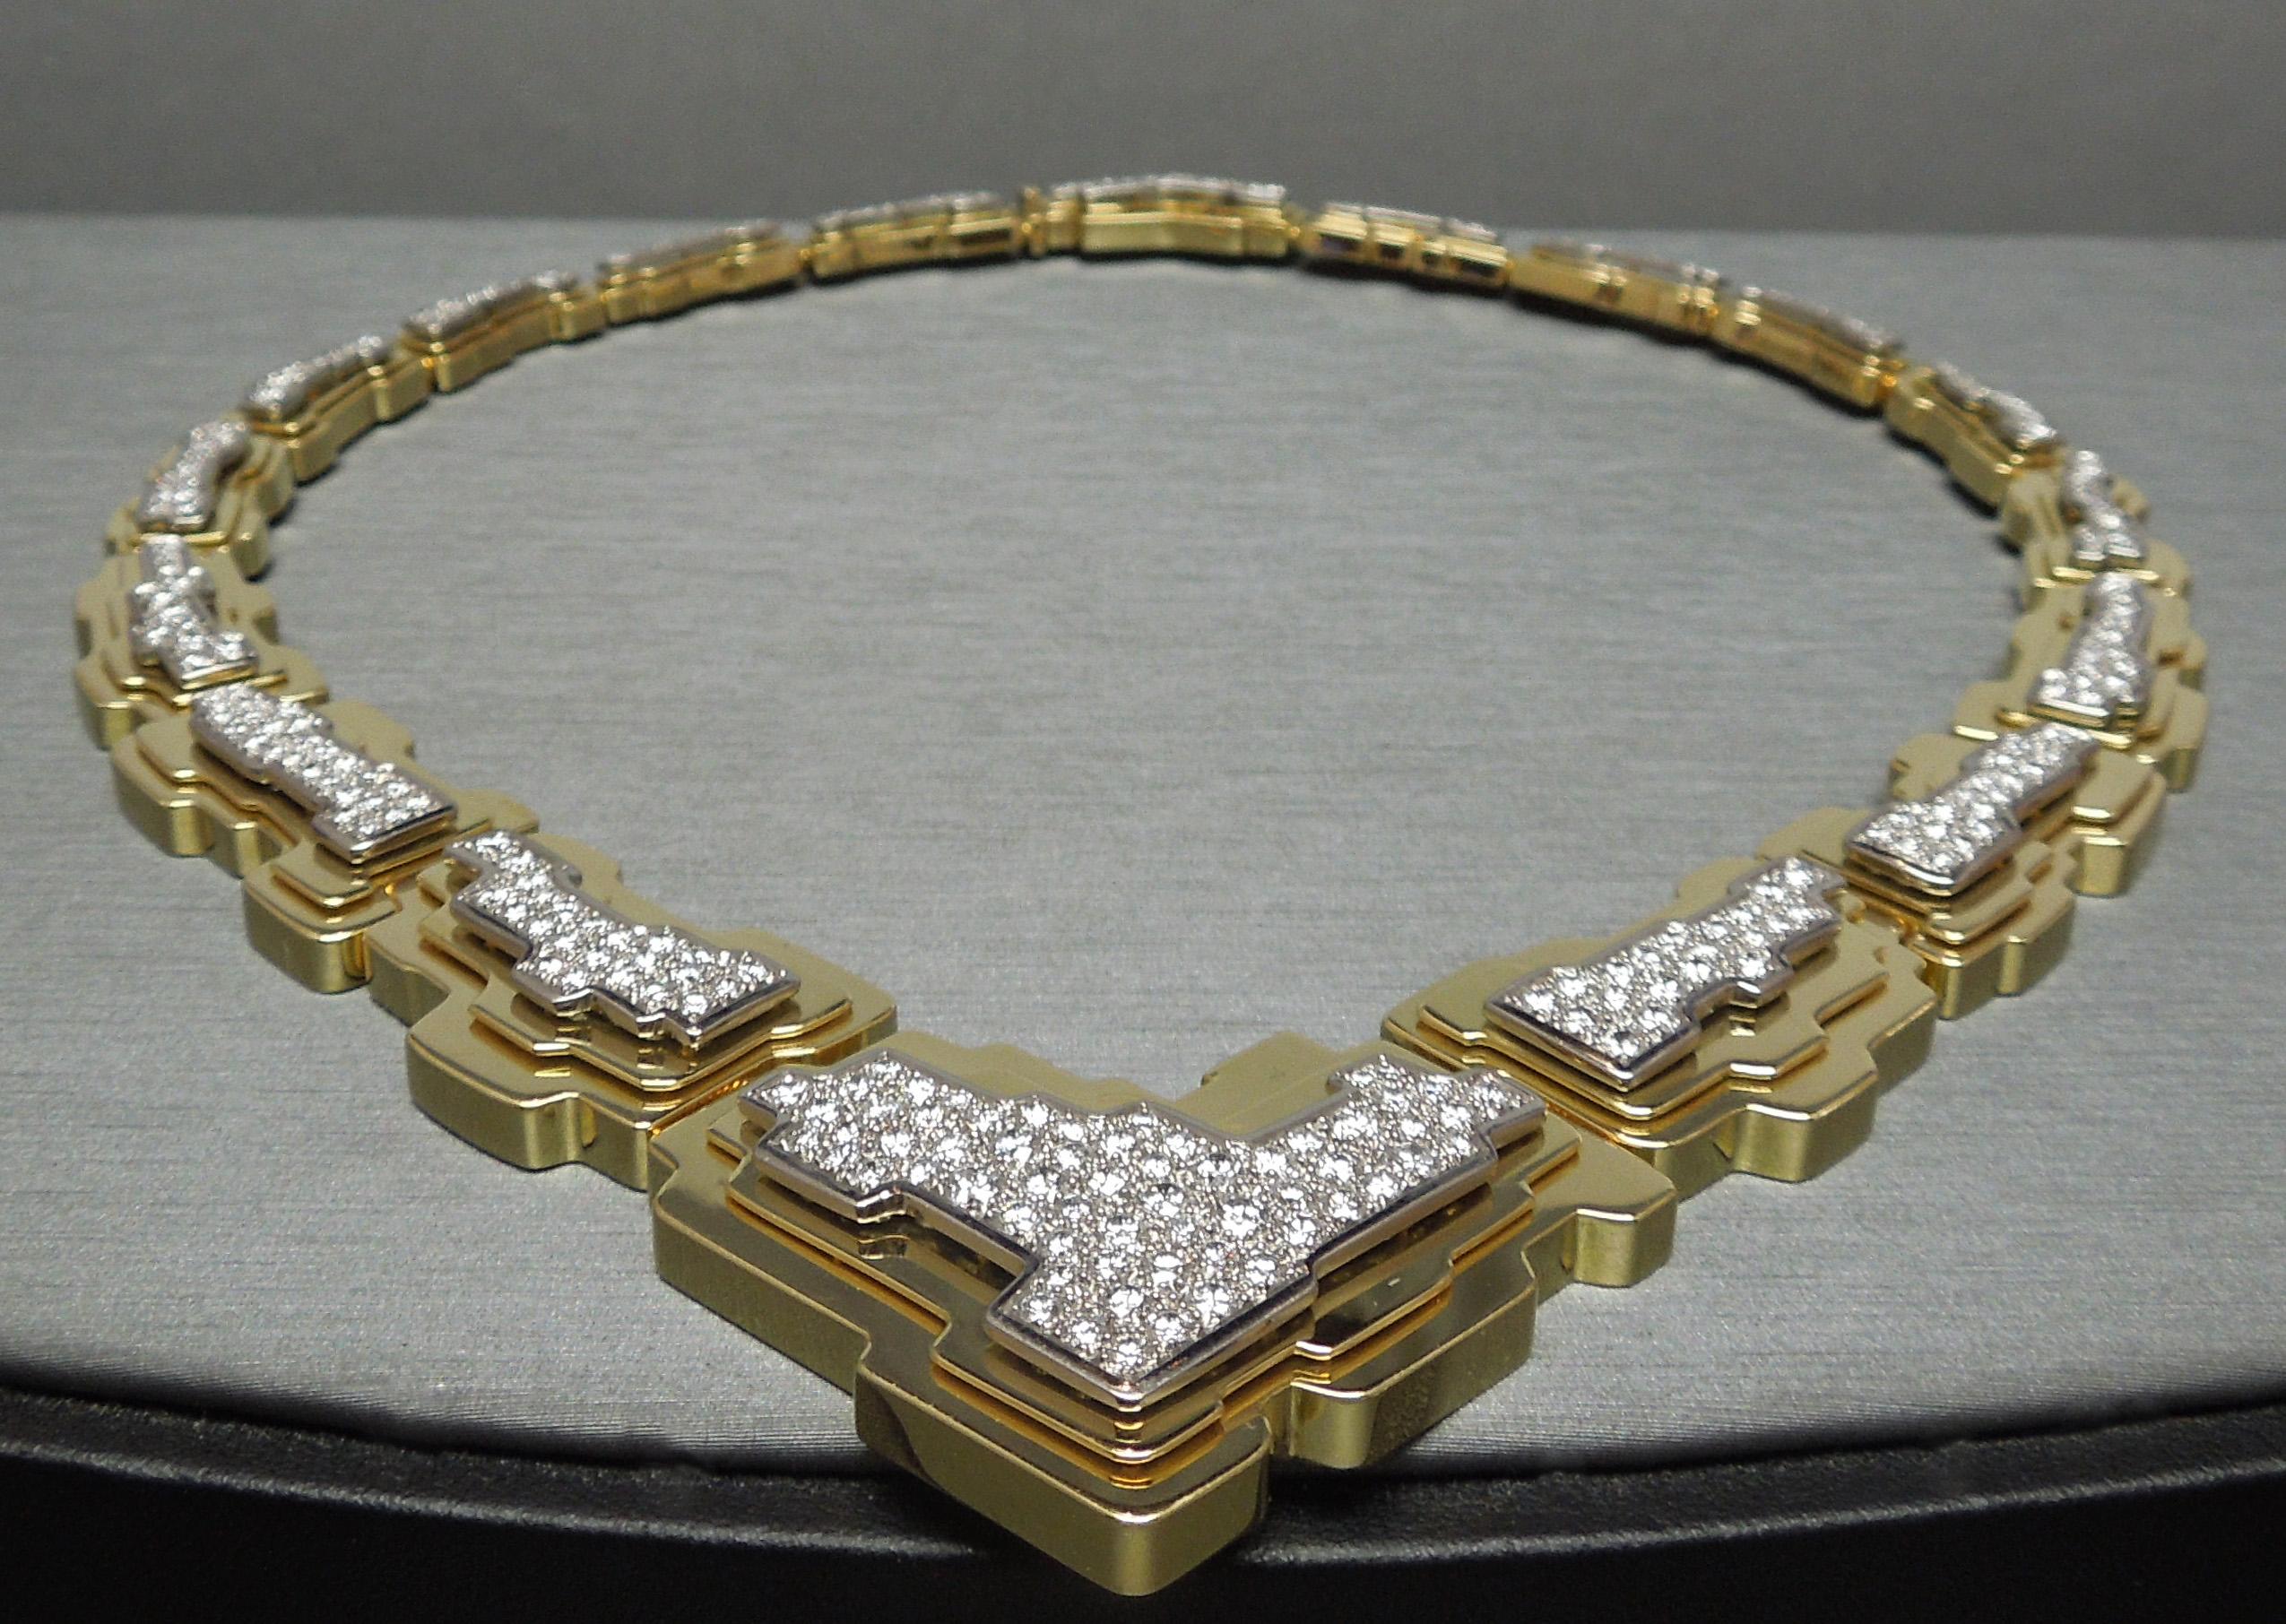 We are thrilled to offer this one of a kind 18 Karat Gold & Brilliant Diamond 3-Piece set hand crafted by Hans Stern. In an asymmetrical, multi-level geometric design encrusted with Pave set Diamonds throughout. 
Set containing a total of 14 carats